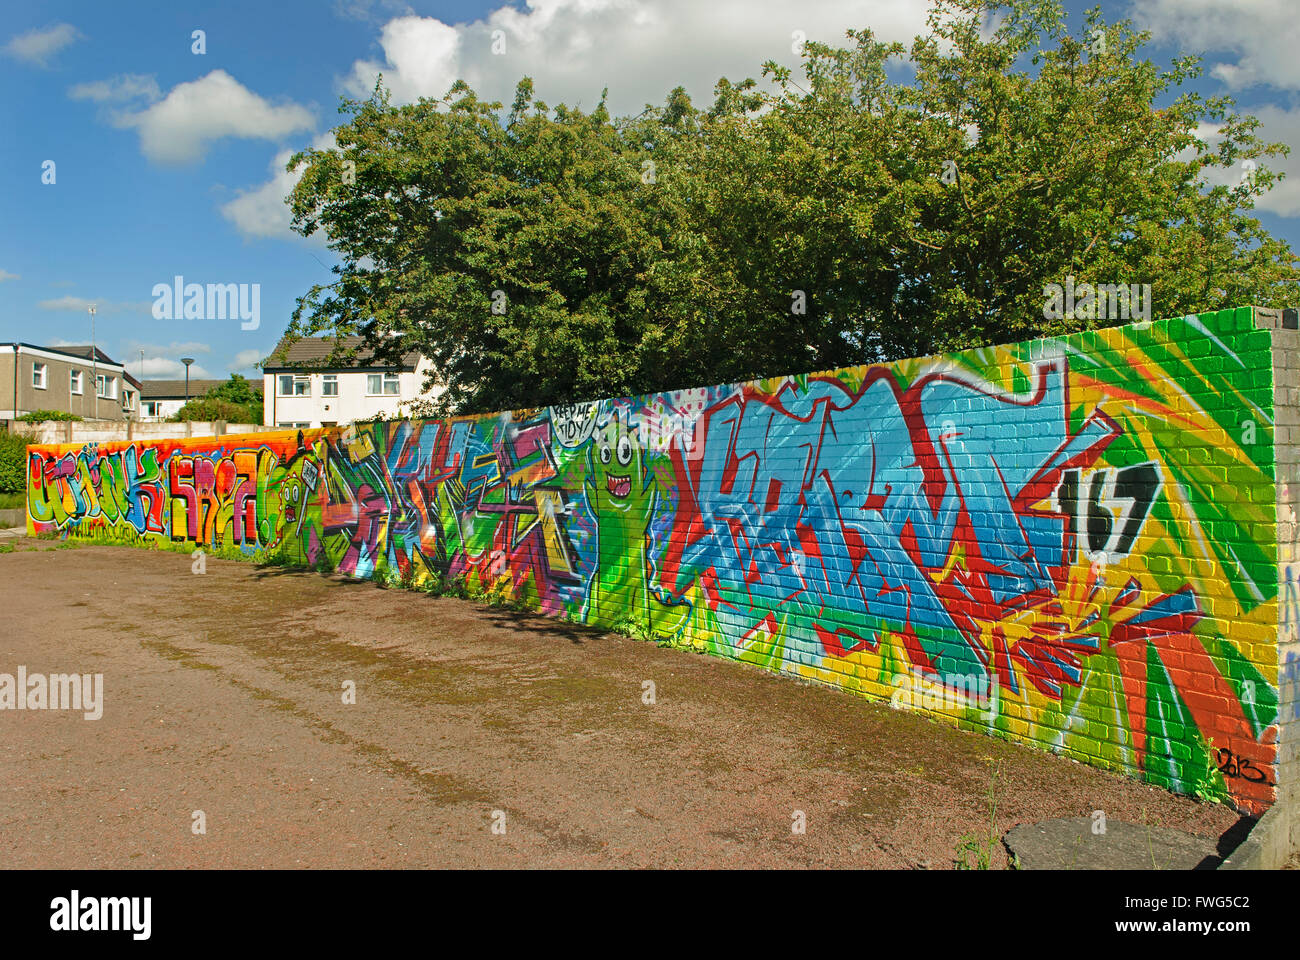 Colourful graffiti as part of modern urban culture in Skelmersdale, Lancashire, UK Stock Photo